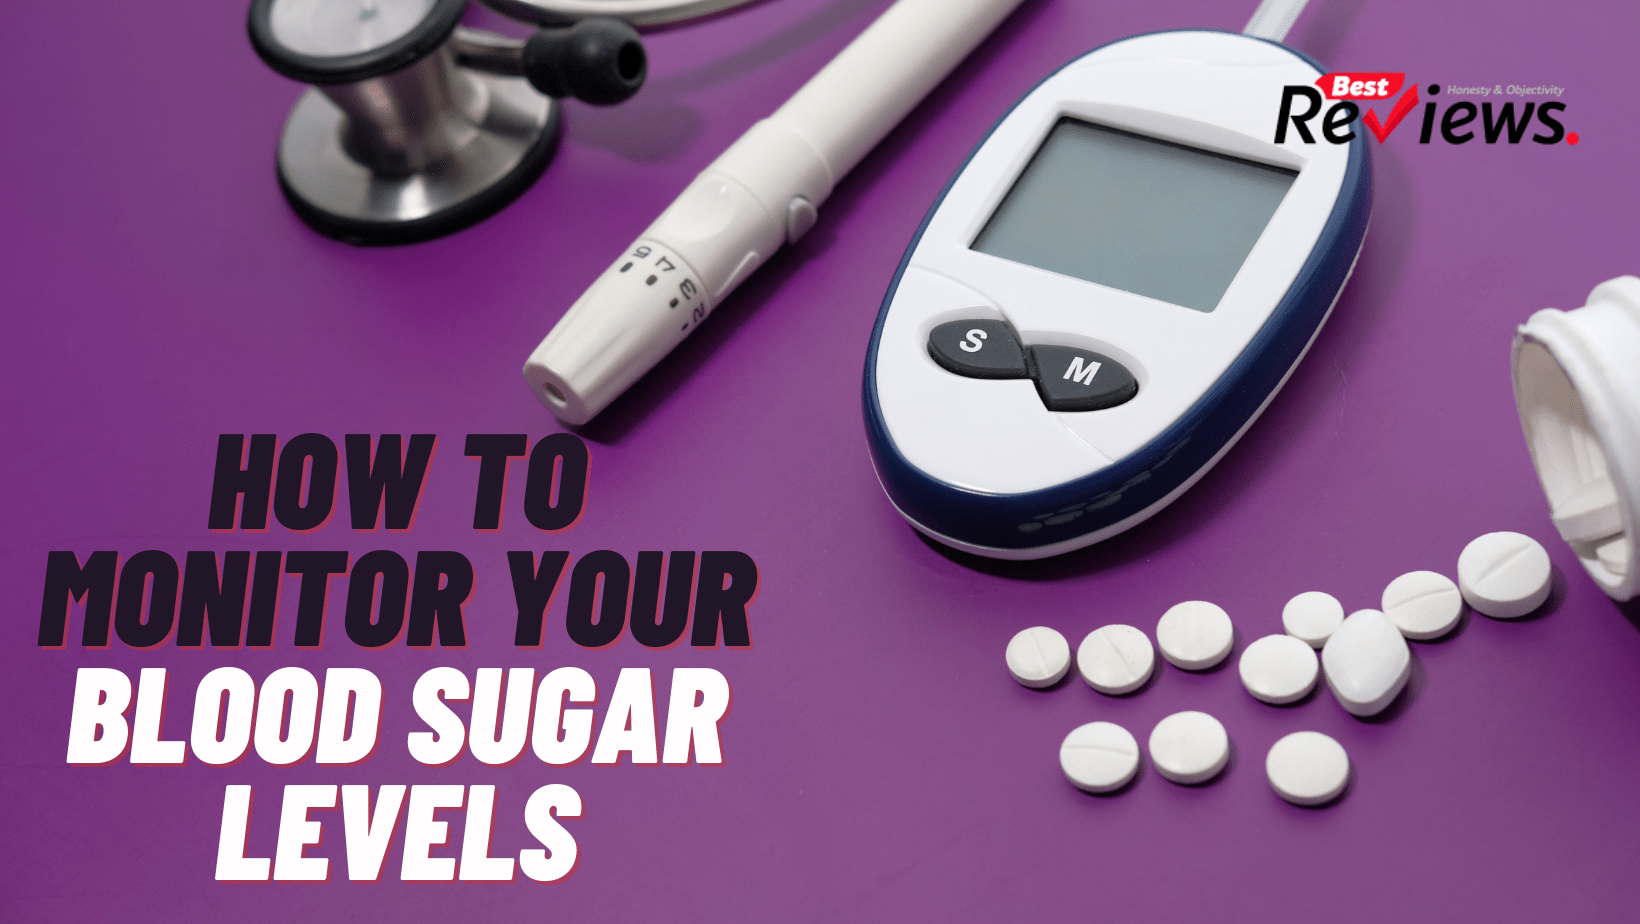 How to Monitor Your Blood Sugar Levels